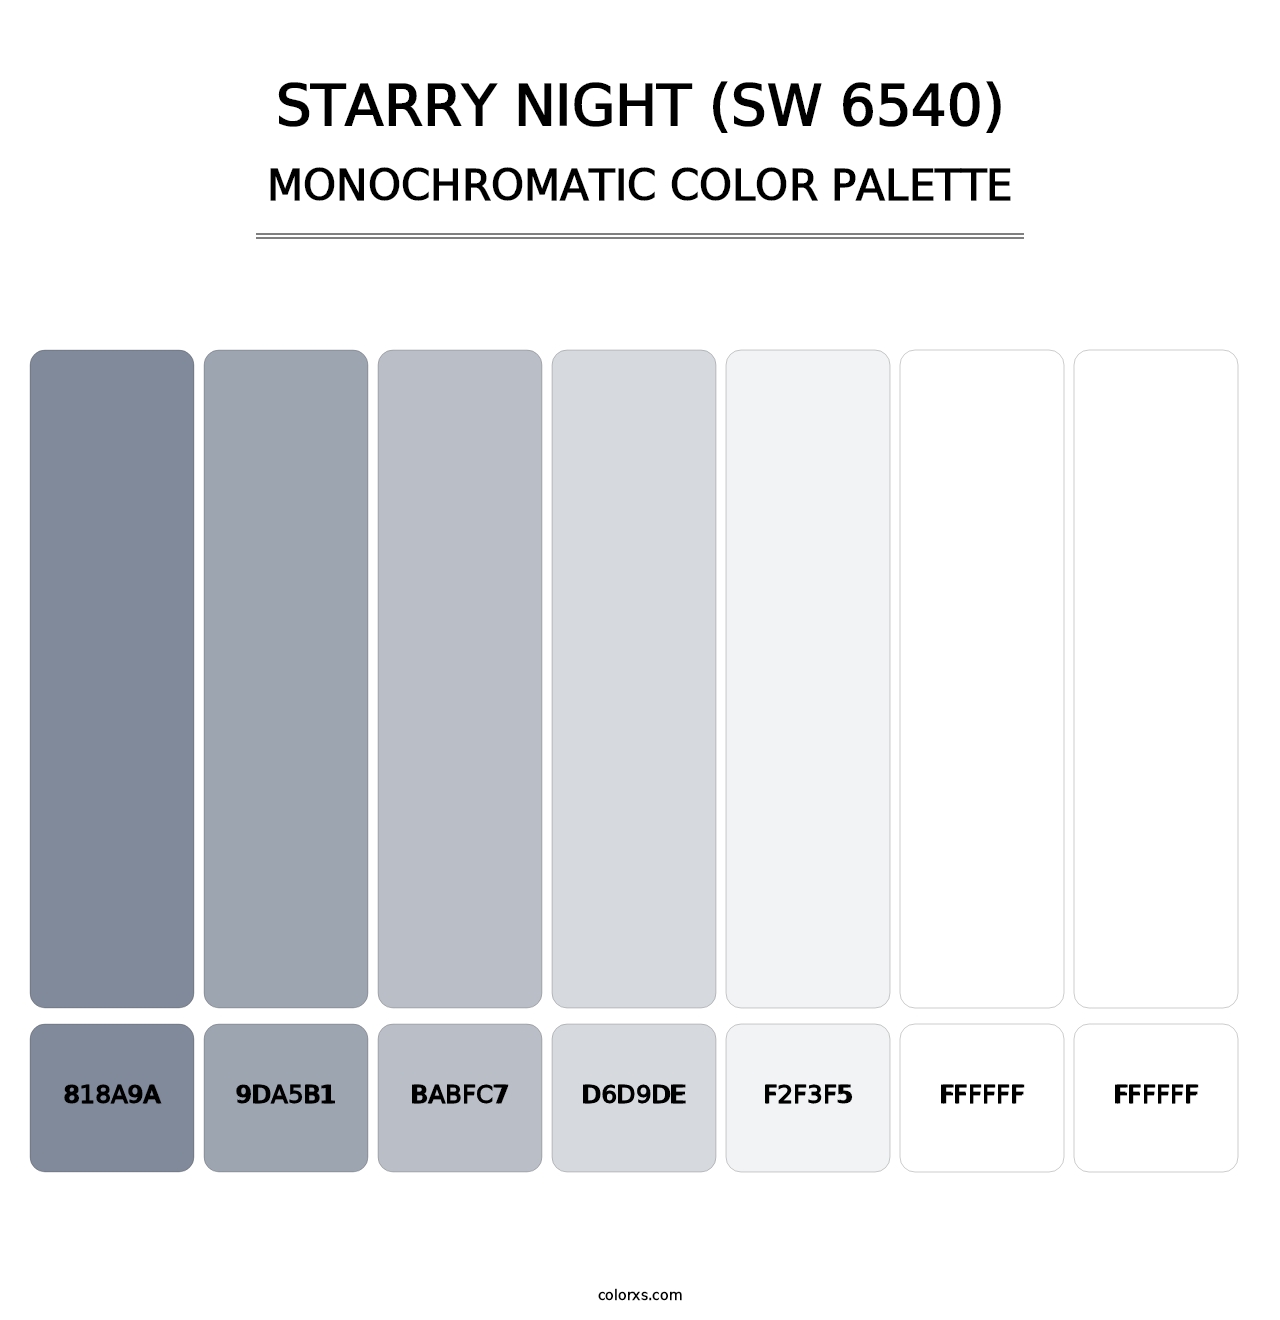 Starry Night (SW 6540) - Monochromatic Color Palette